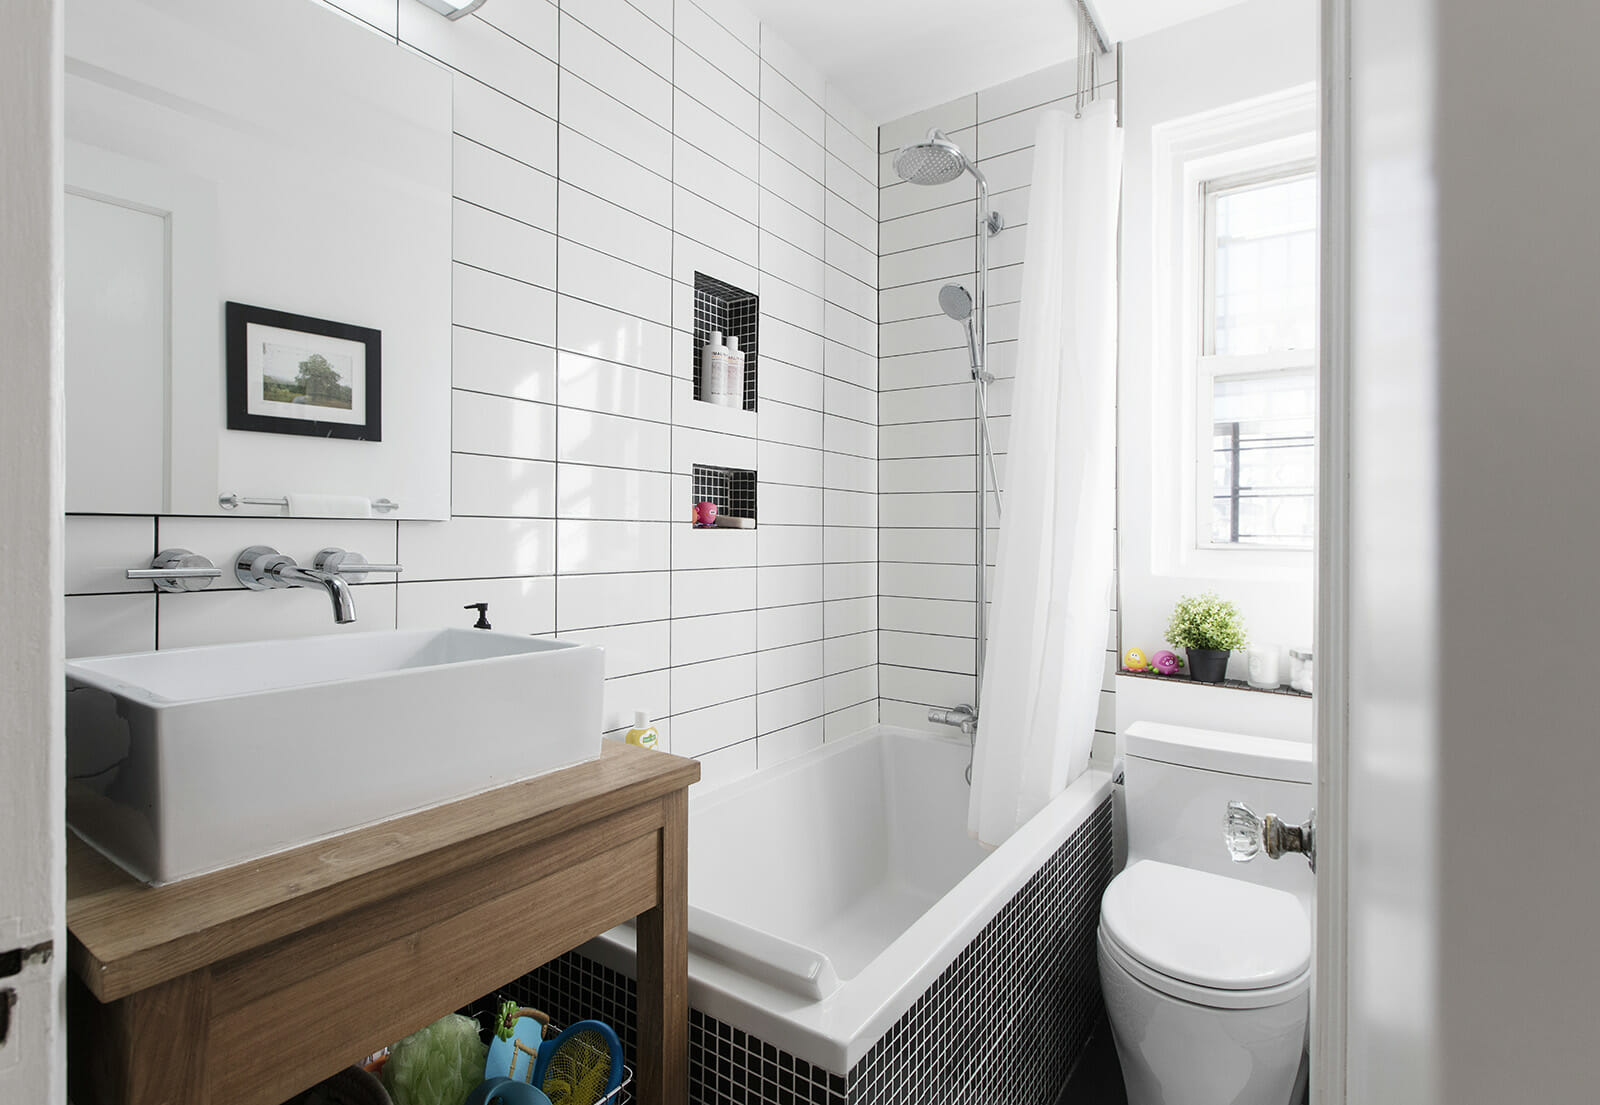 Small bathrooms with clever storage spaces